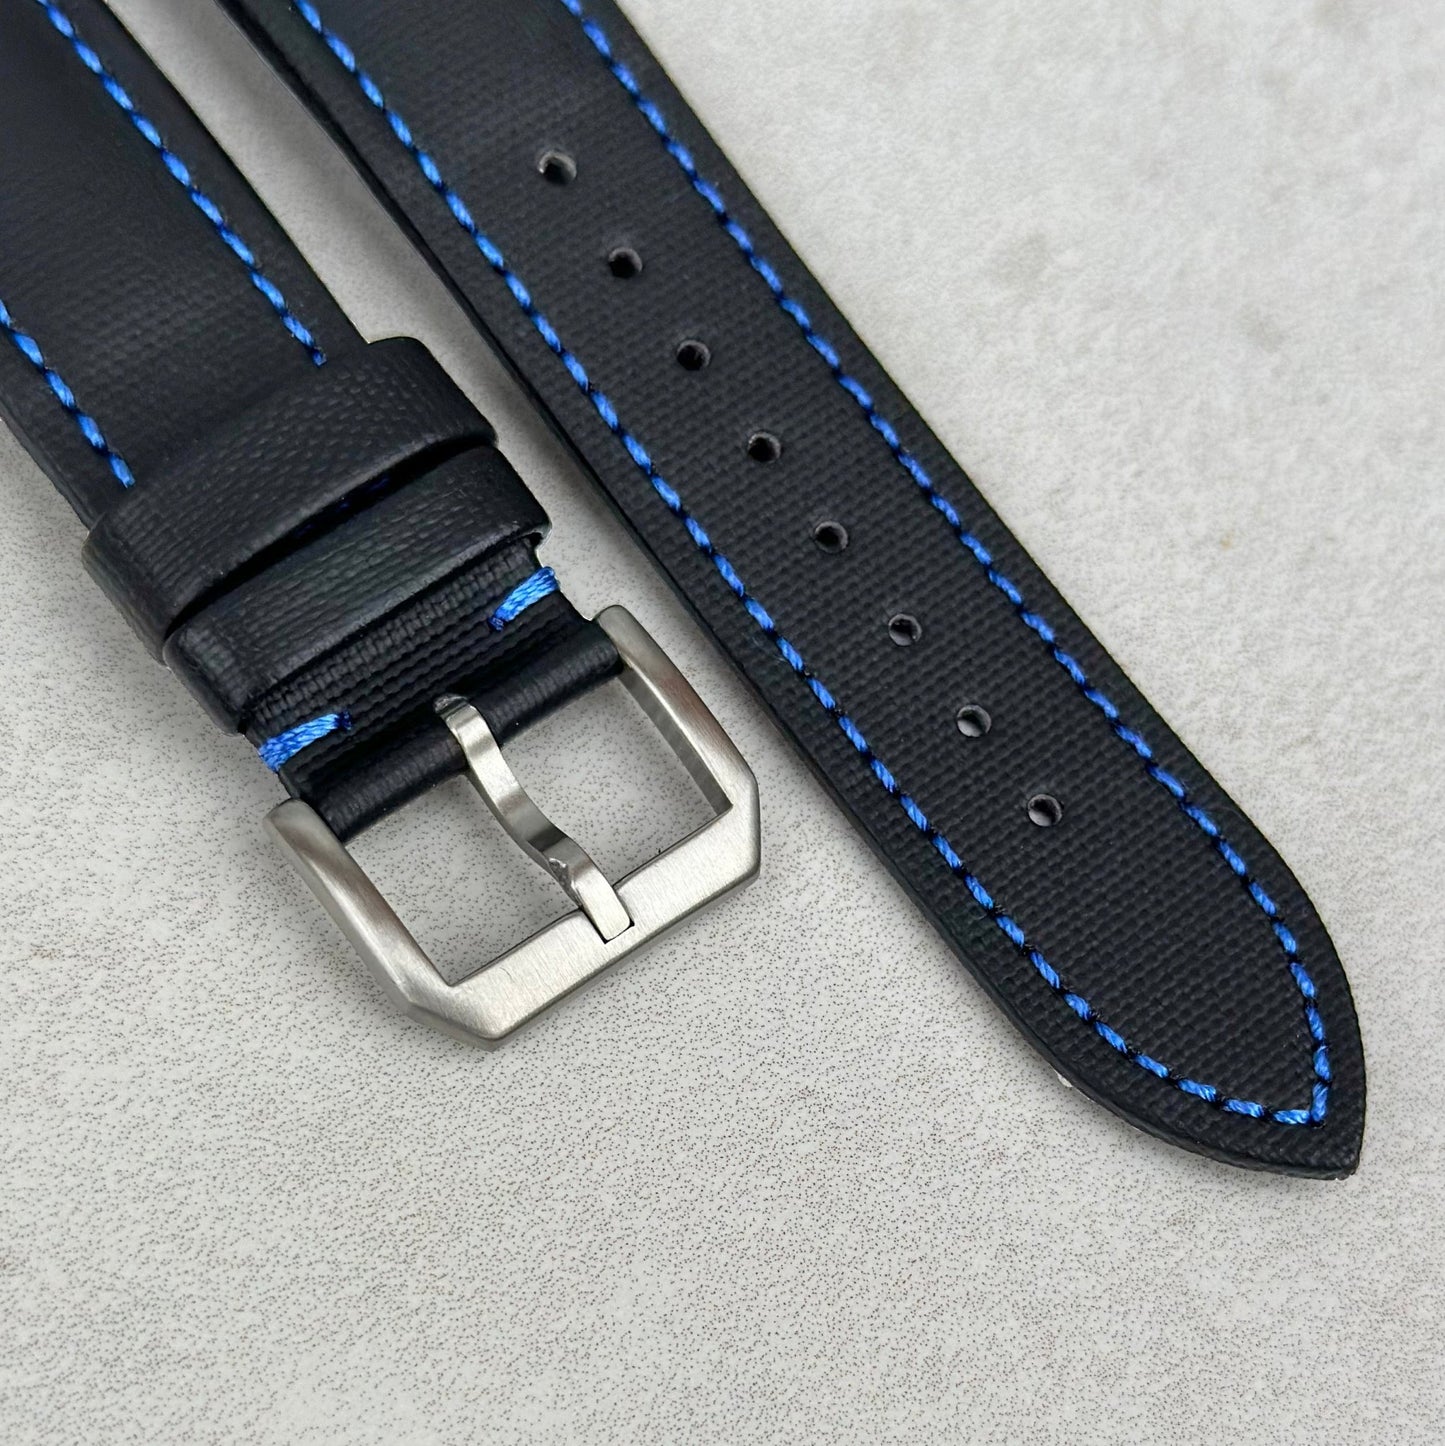 Brushed 316L stainless steel buckle on the Bermuda jet black sail cloth watch strap. Watch And Strap